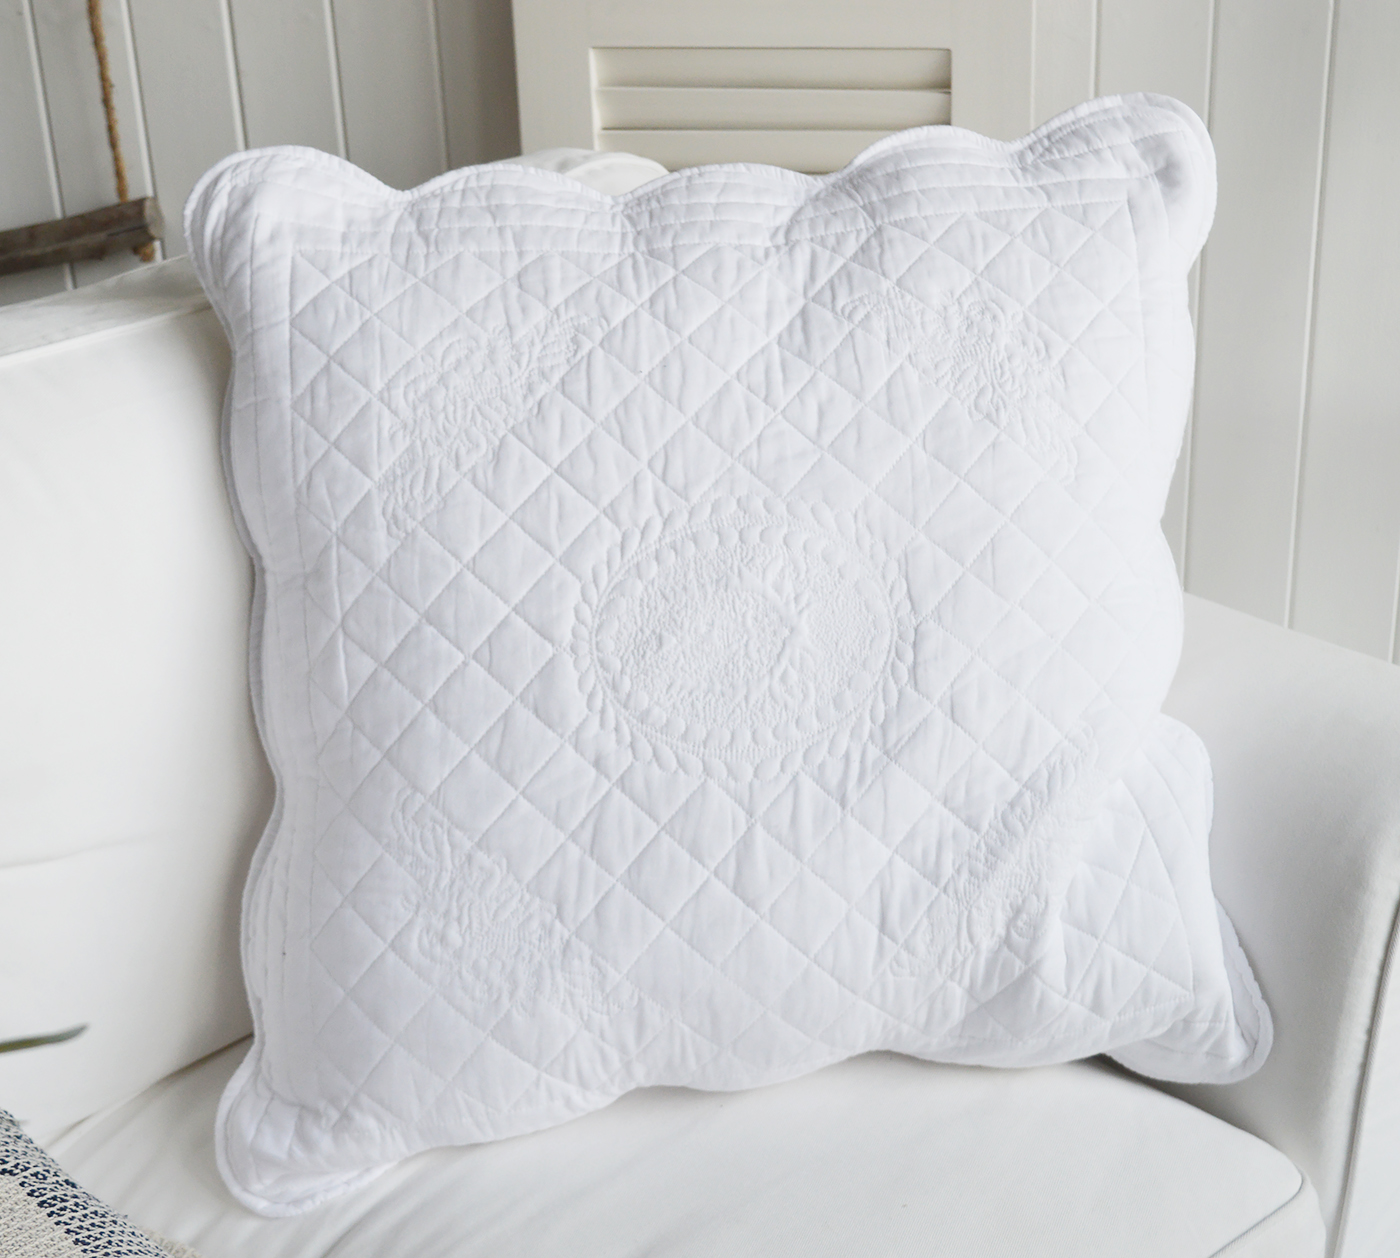 The White Lighthouse. New England style furniture and home interiors for coastal, country and farmhouse interior design - Range of cushions - Pure White Large Cushion Pillow Sham